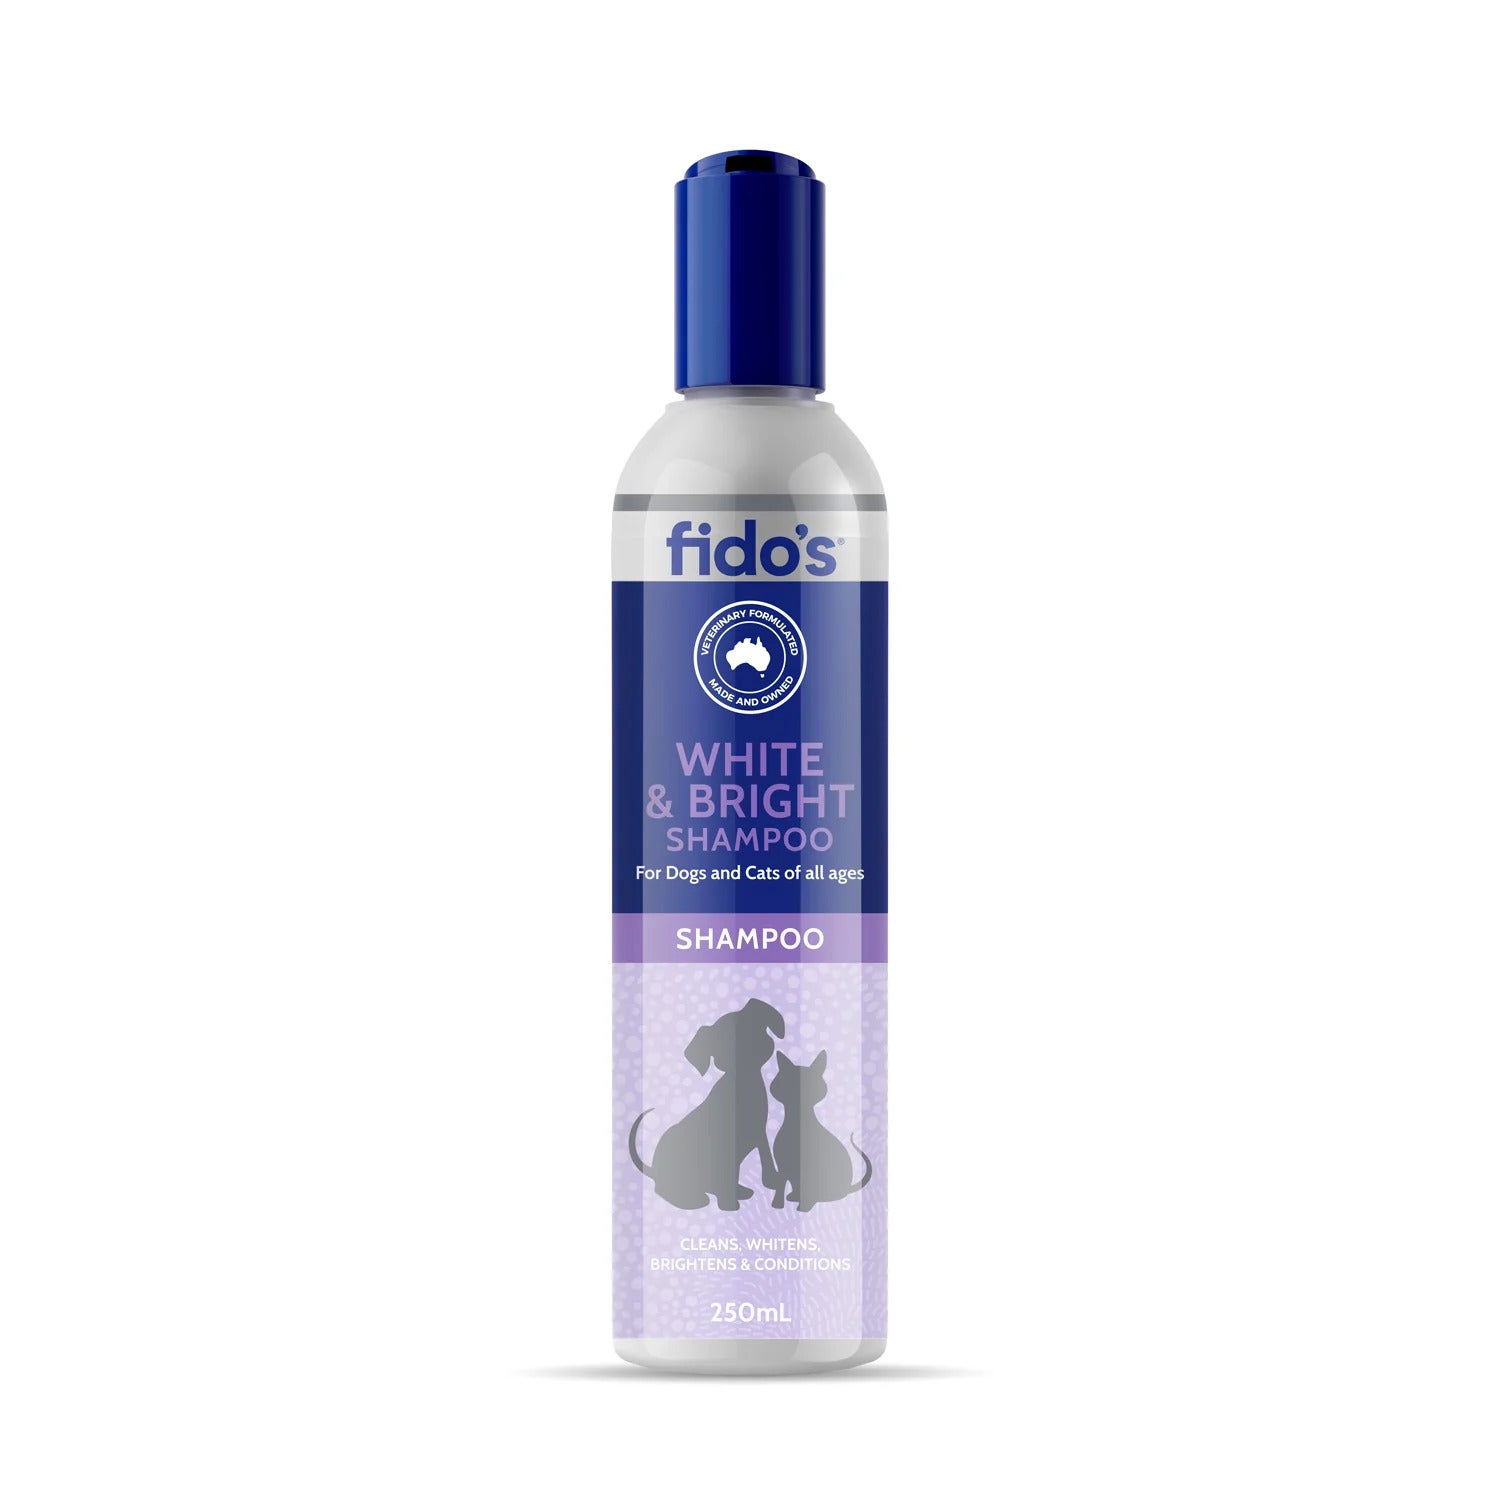 Fido's White & Bright Shampoo 250ml for Dogs, Cats, Puppies & Kittens